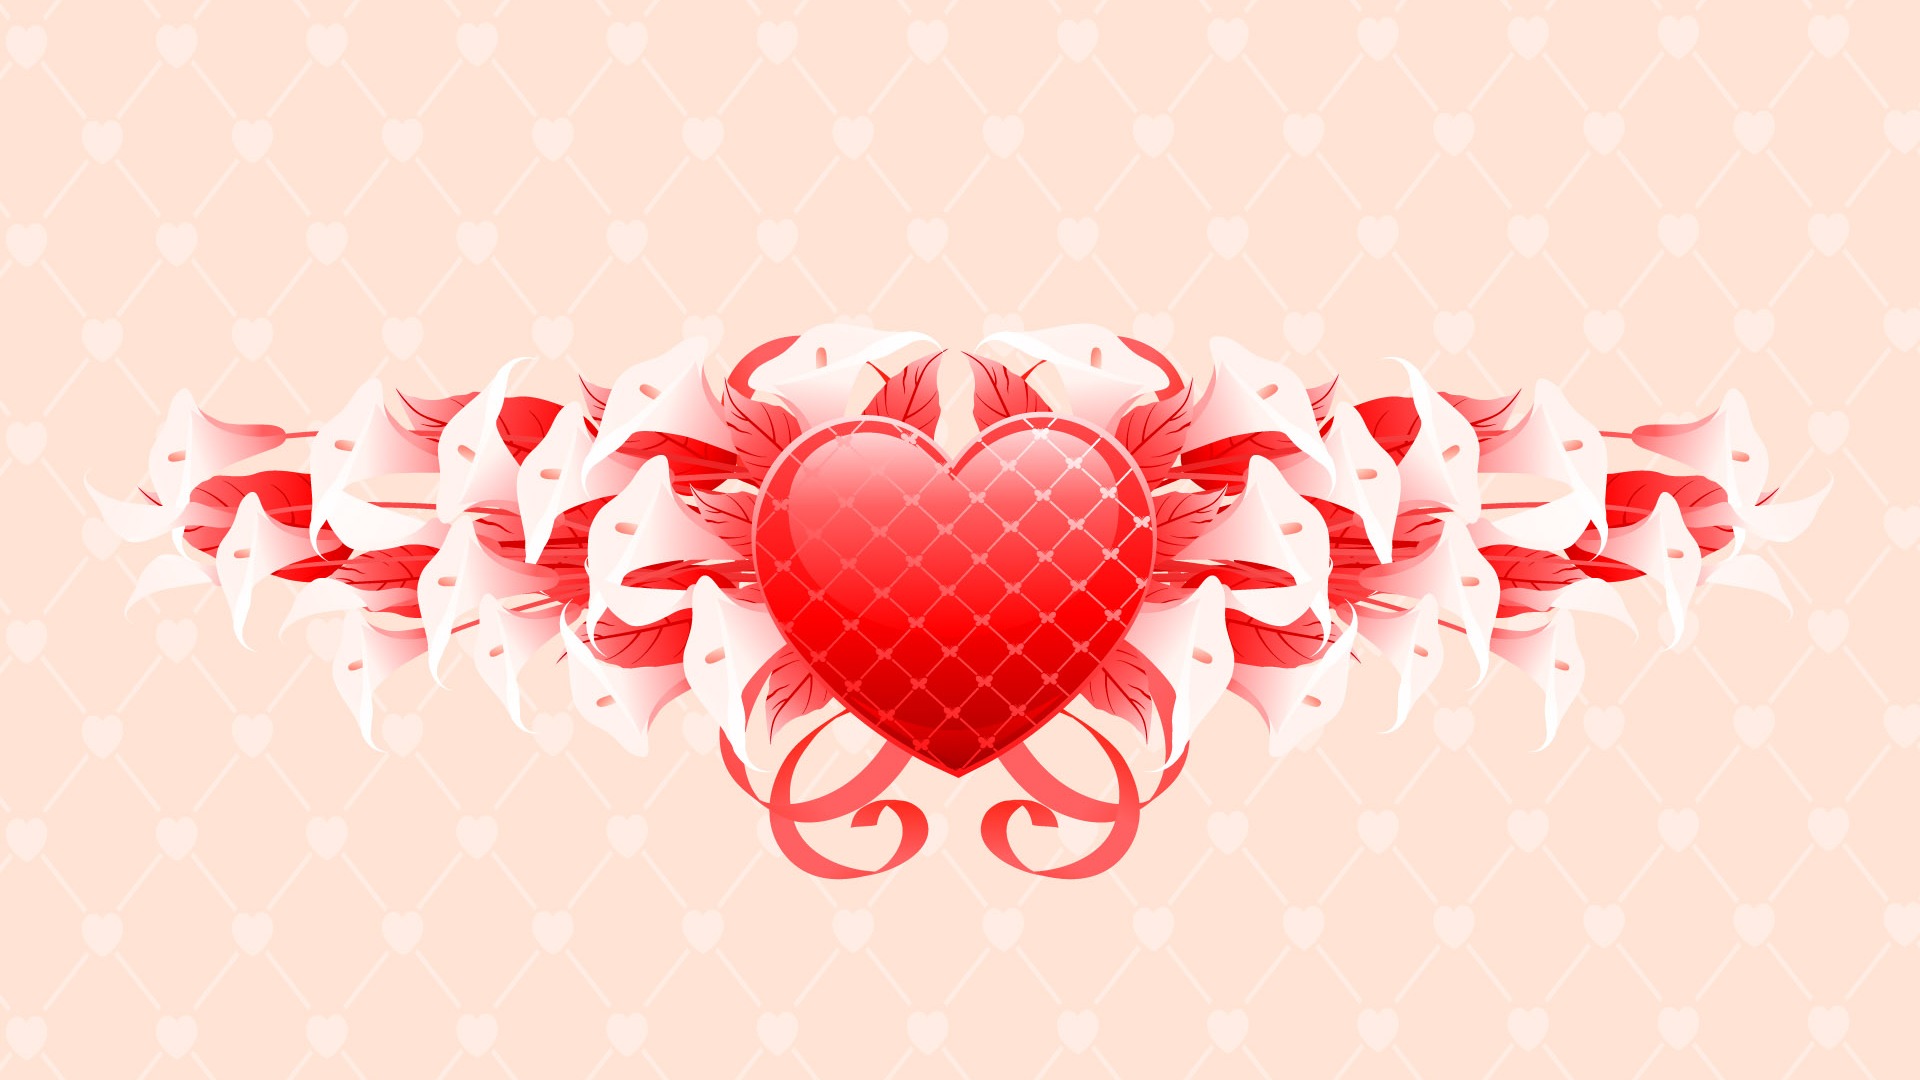 Valentine's Day Theme Wallpapers (6) #16 - 1920x1080